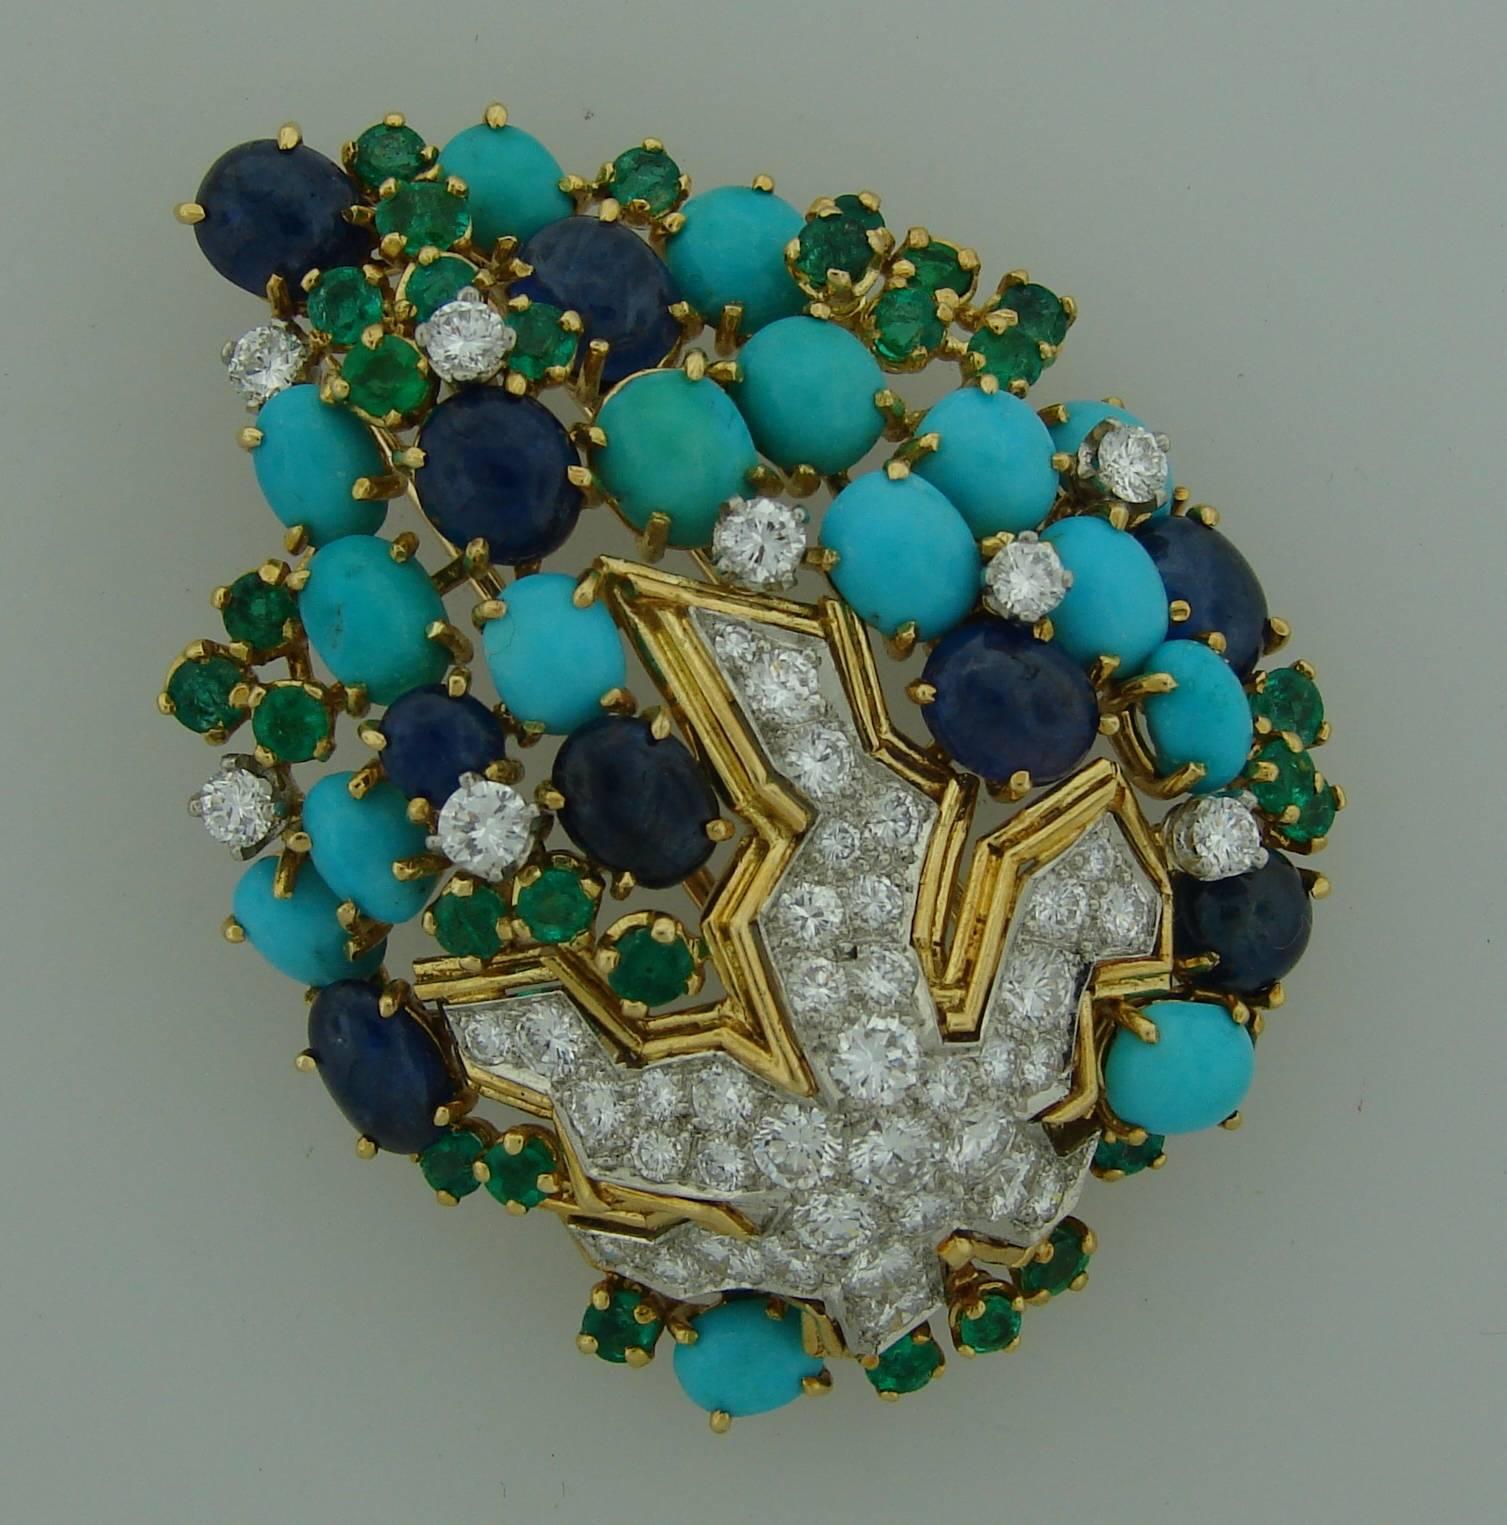 Chic and colorful brooch created in France in the 1970's. Made of 18k yellow gold and set with diamonds, turquoise, emeralds and sapphires. The diamonds are set in white gold which accentuates whiteness of the diamonds - thorough workmanship! The